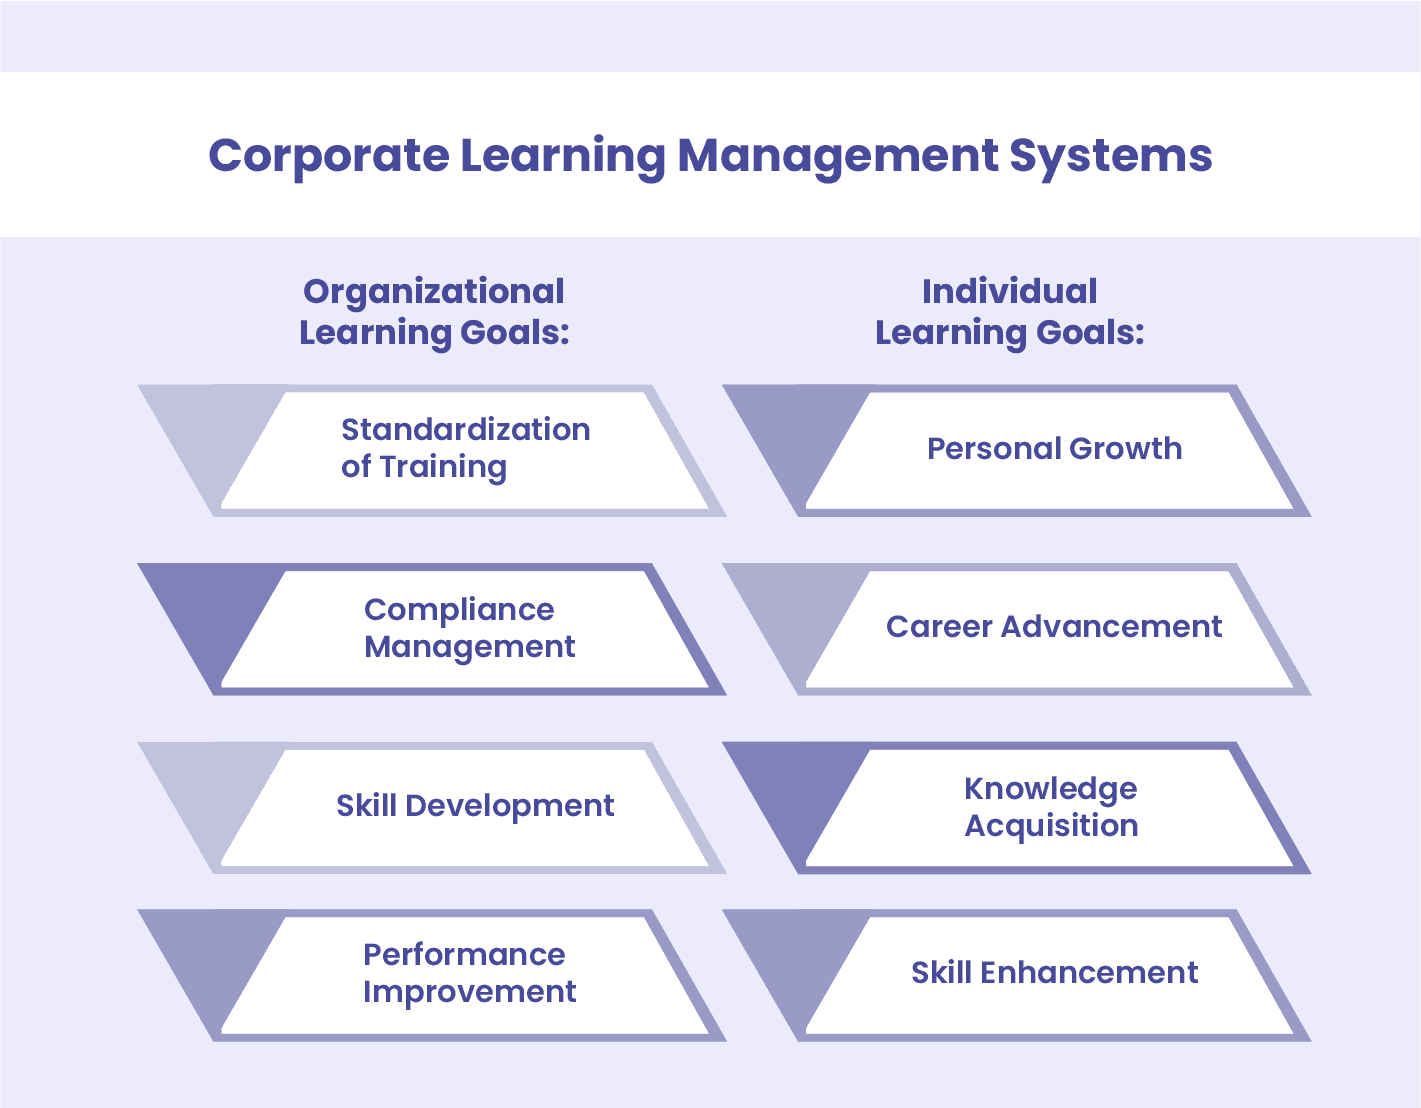 Corporate Learning Management Systems goals